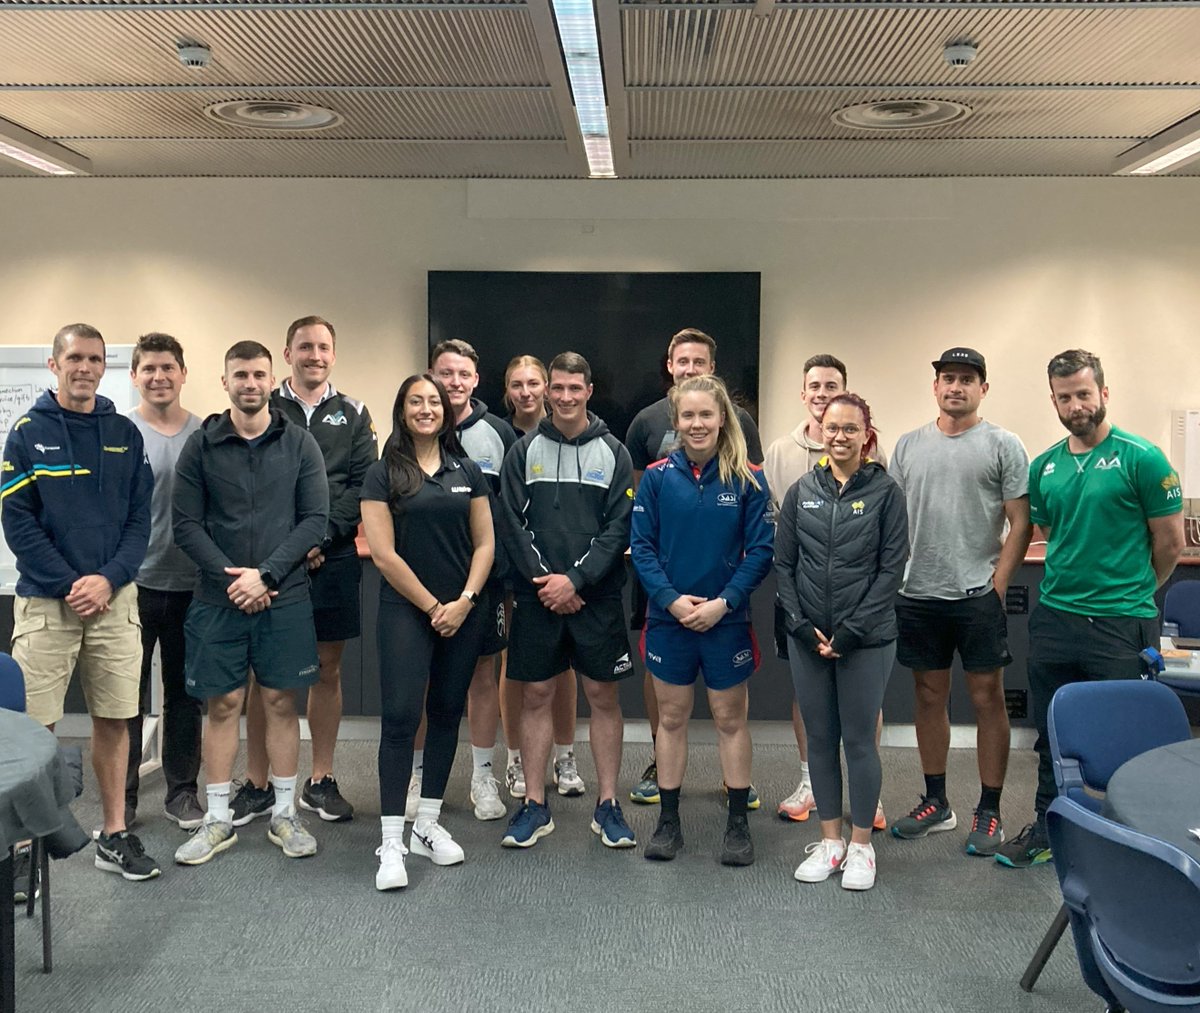 #Coaching | We're lifting the bar for strength and conditioning coach development 💪 Australia’s top strength and conditioning coaches are leveling up thanks to #theAIS's specialised professional development workshops. Read more 👉 ais.gov.au/media-centre/n…